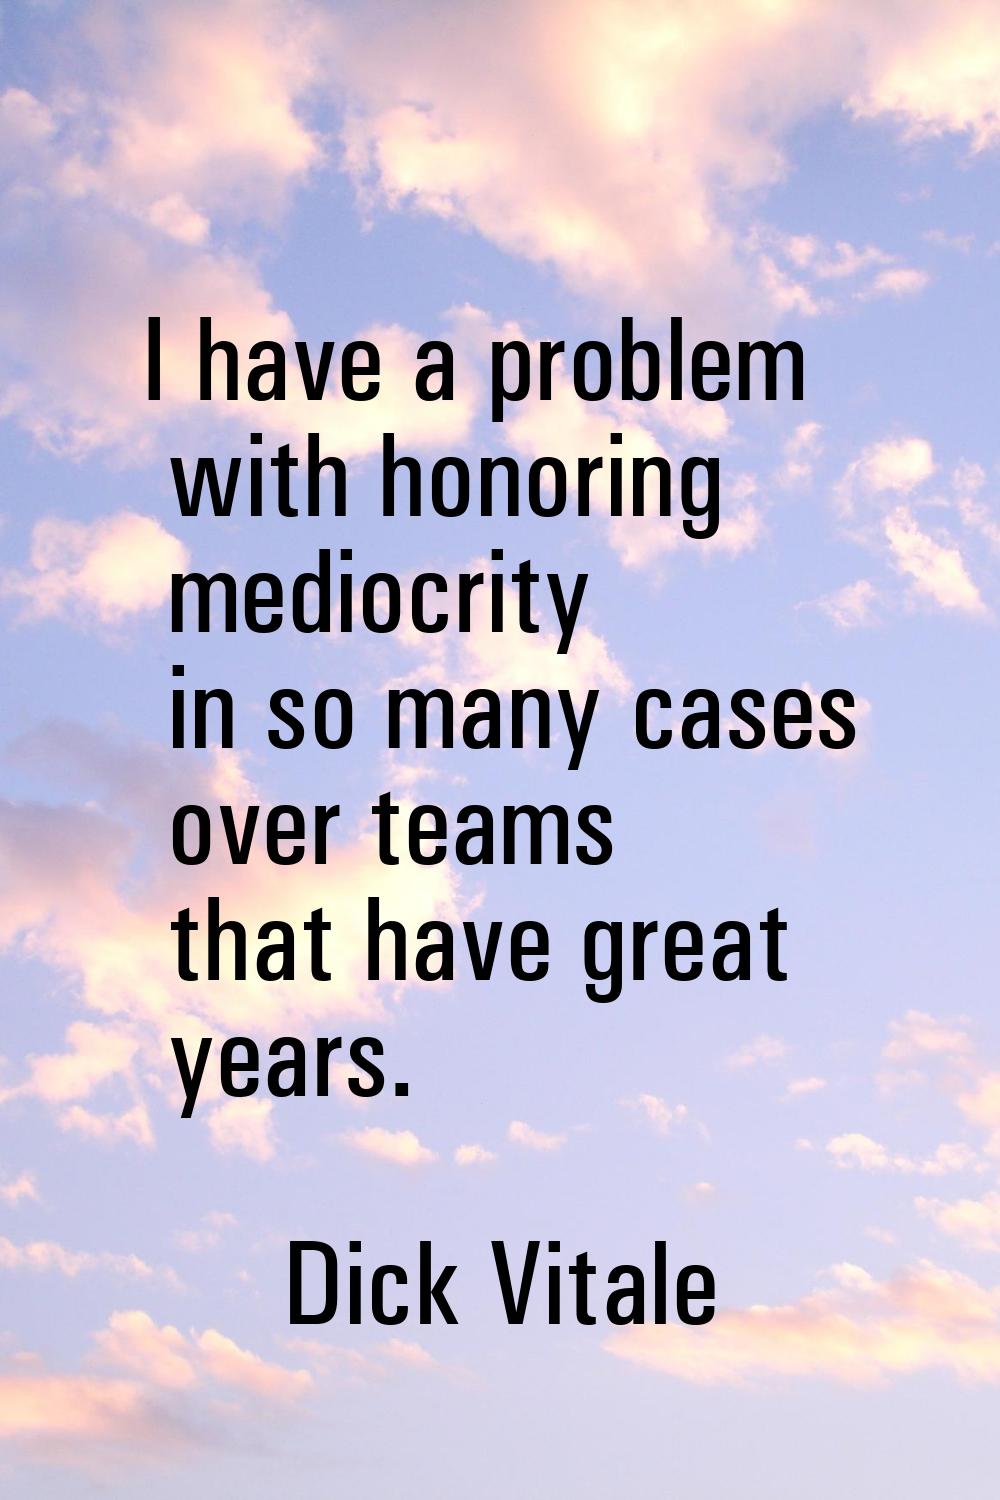 I have a problem with honoring mediocrity in so many cases over teams that have great years.